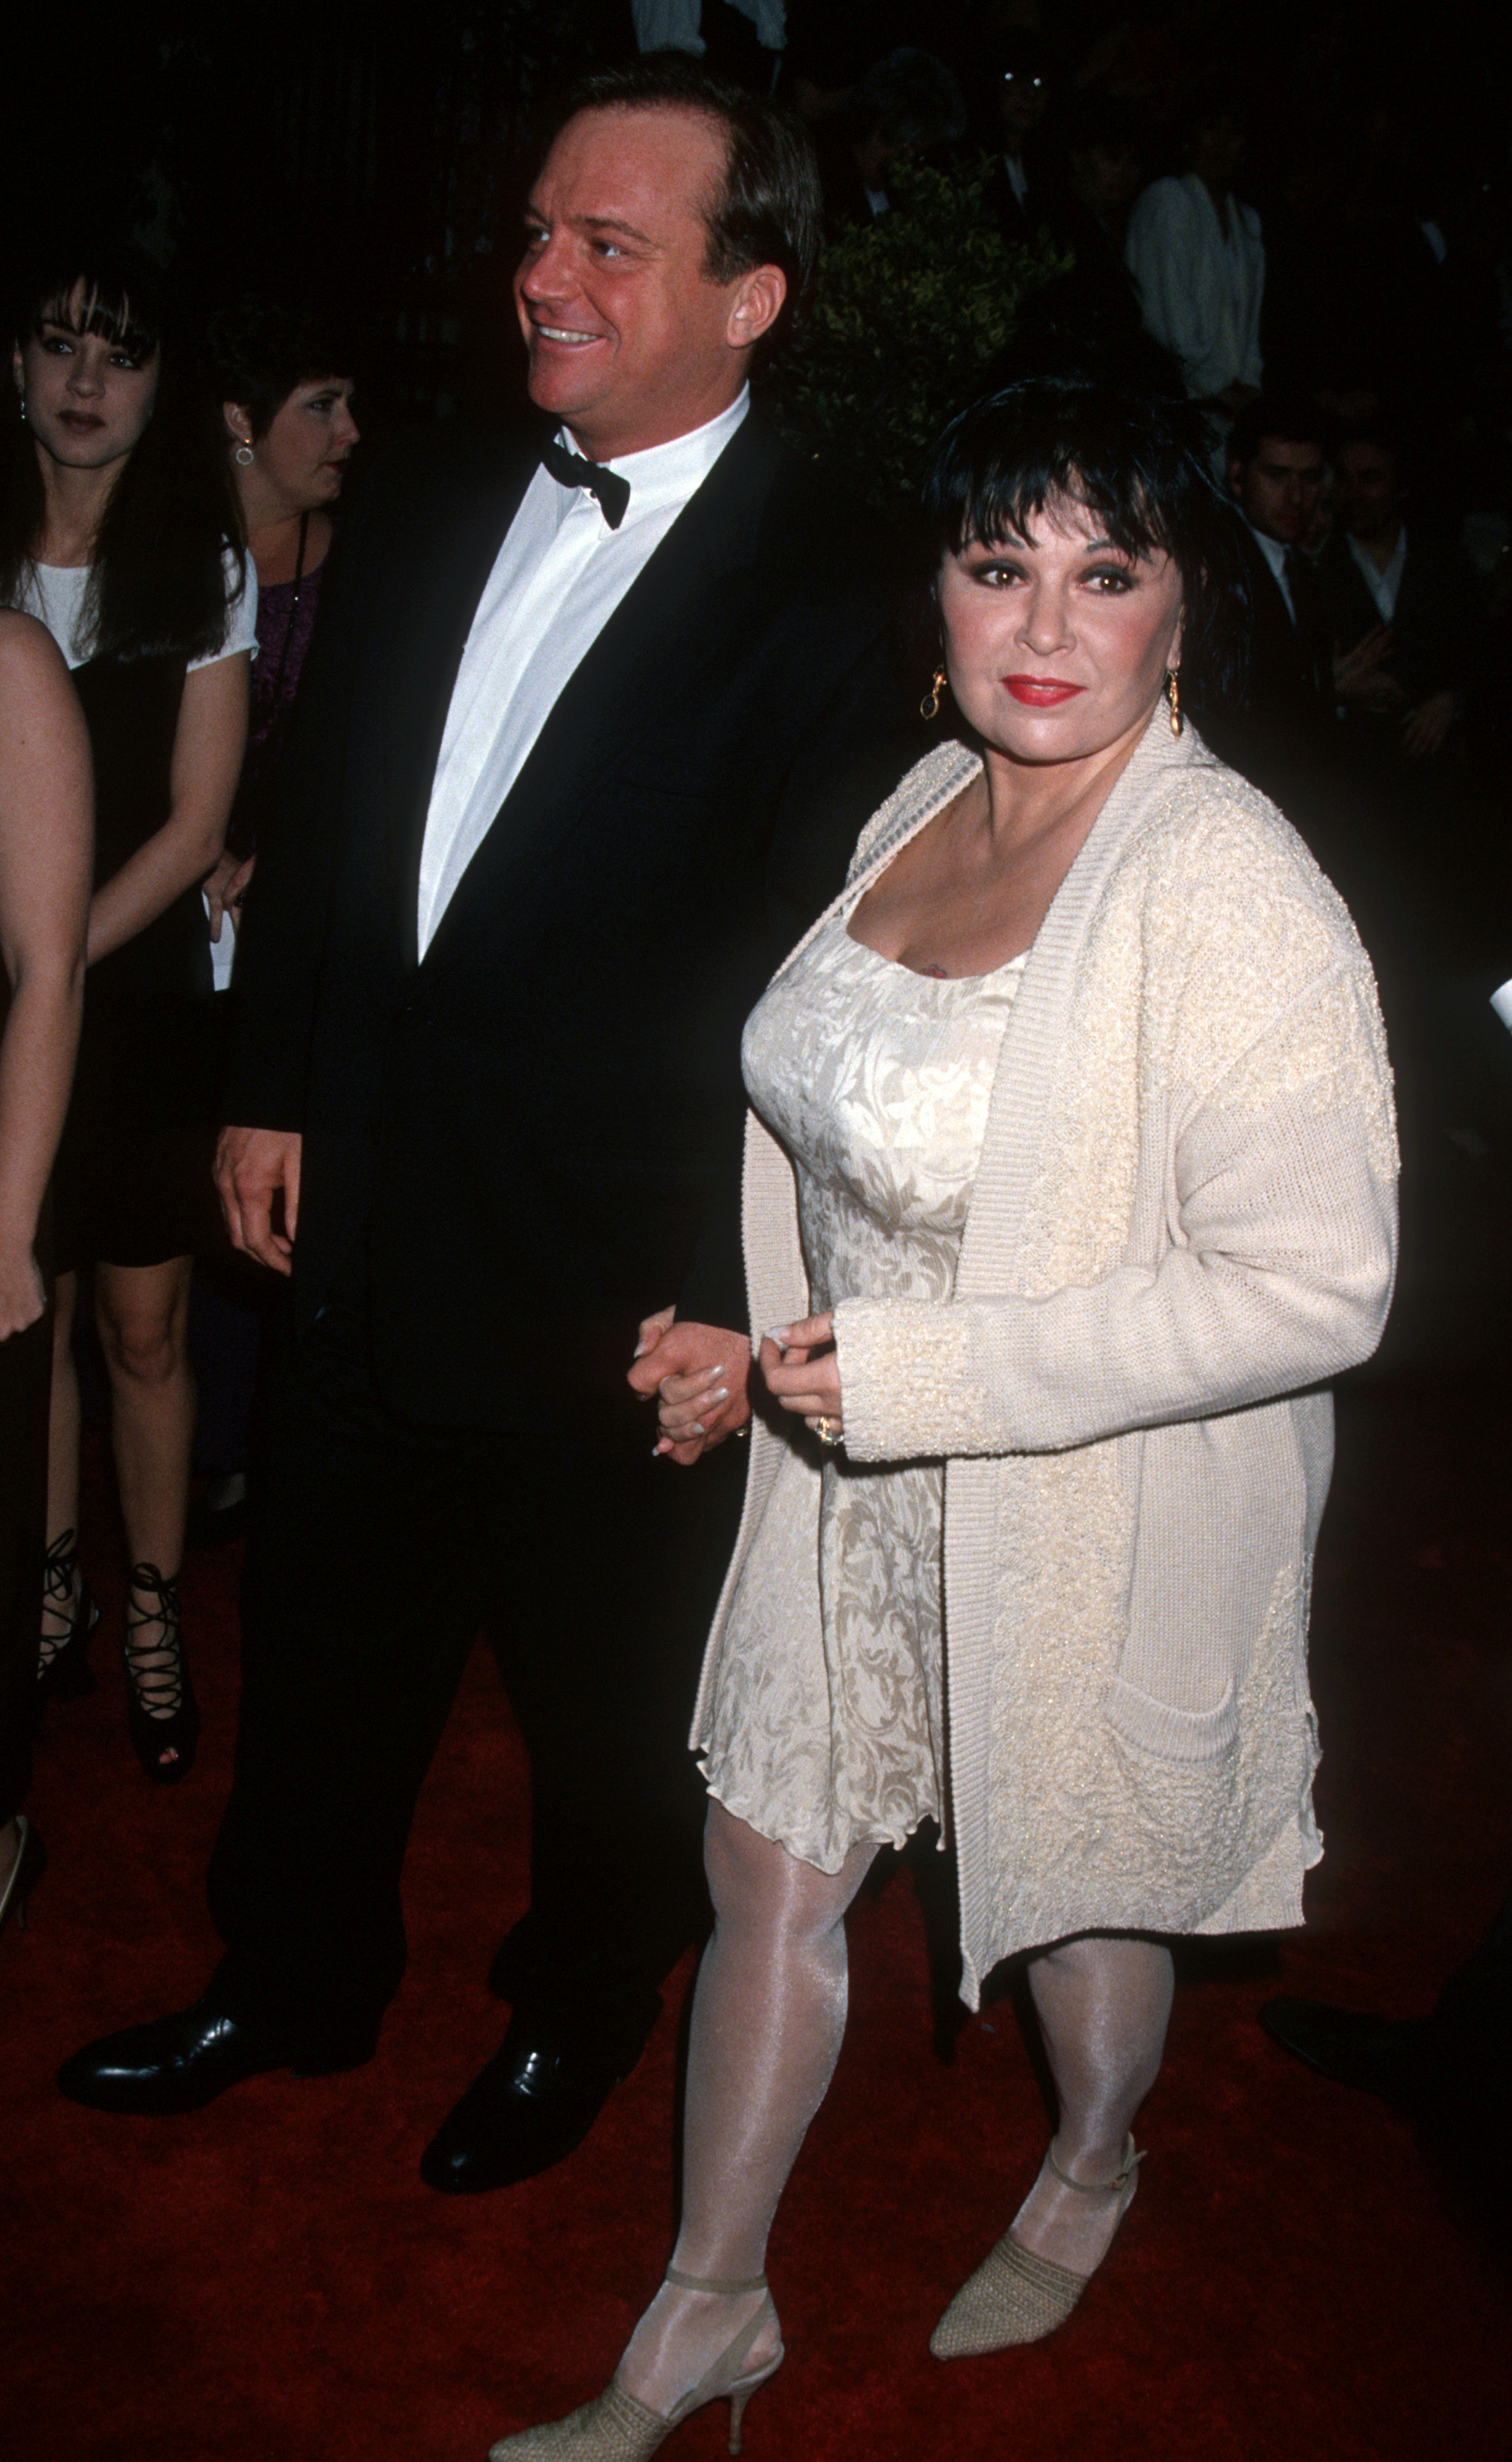 Tom Arnold and Roseanne Barr during 20th Annual People's Choice Awards at Sony Studios in Culver City, California, United States, in 1994 | Source: Getty Images